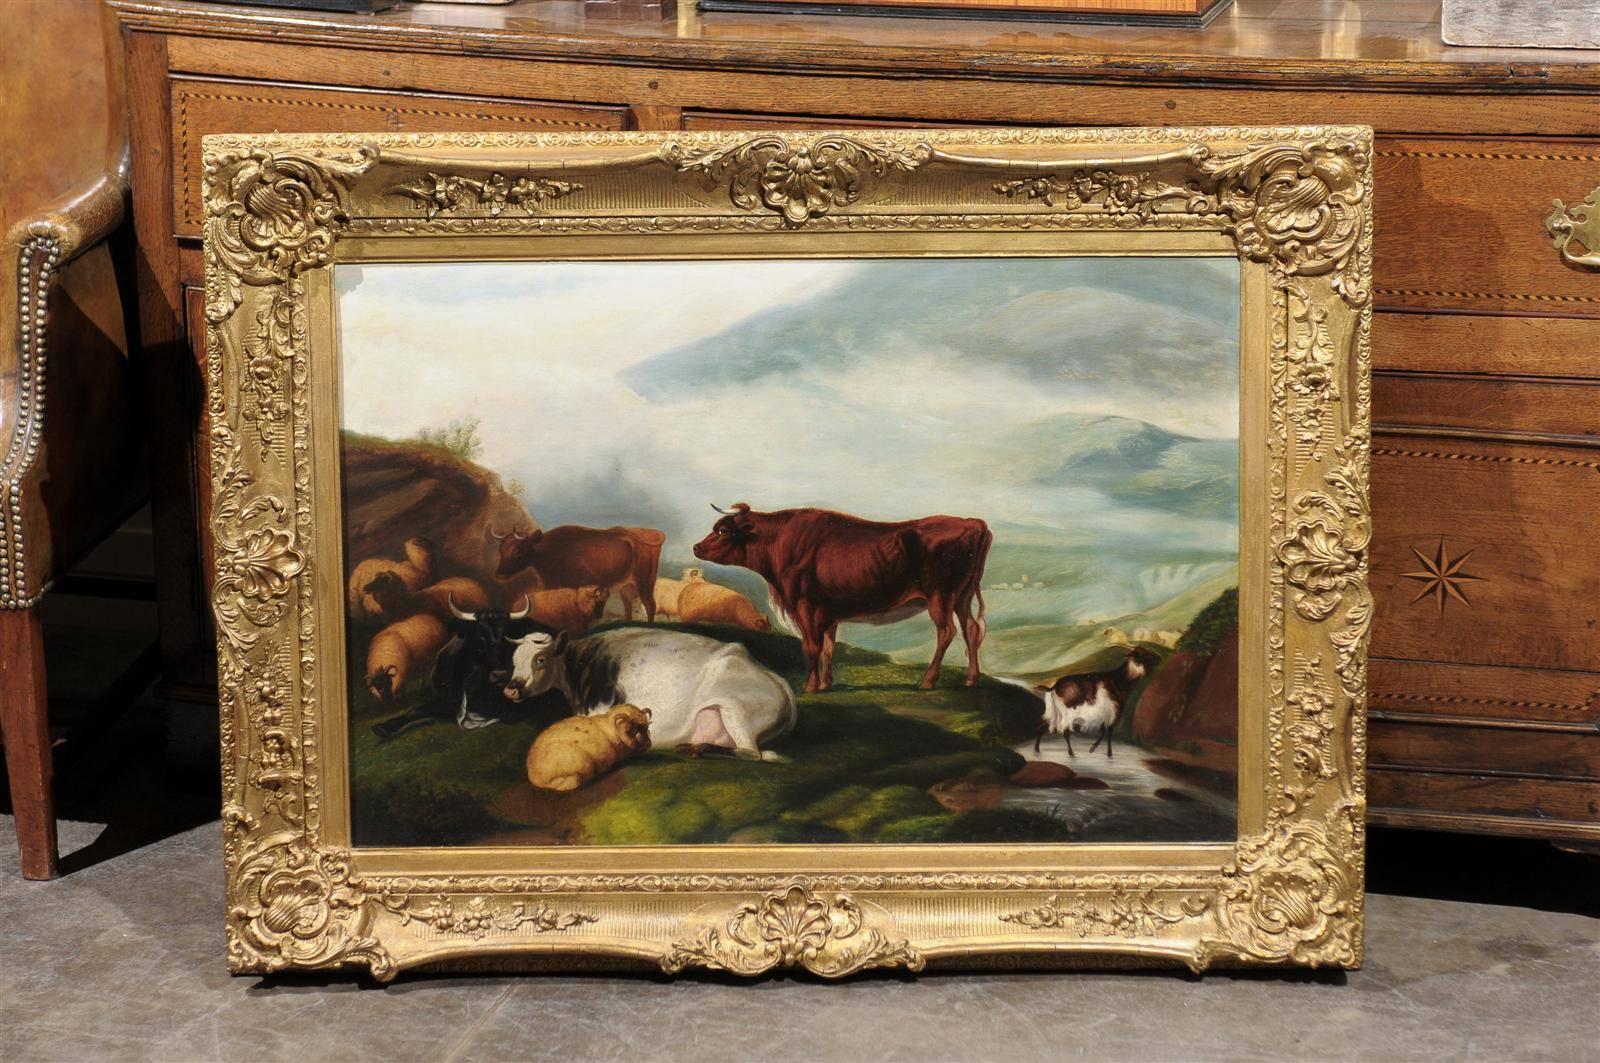 A large size English late 19th century framed pastoral oil painting depicting cattle, sheep and goat in a landscape. The center of the composition is occupied by a brown cow that is proudly standing on the luscious green grass and seems to be